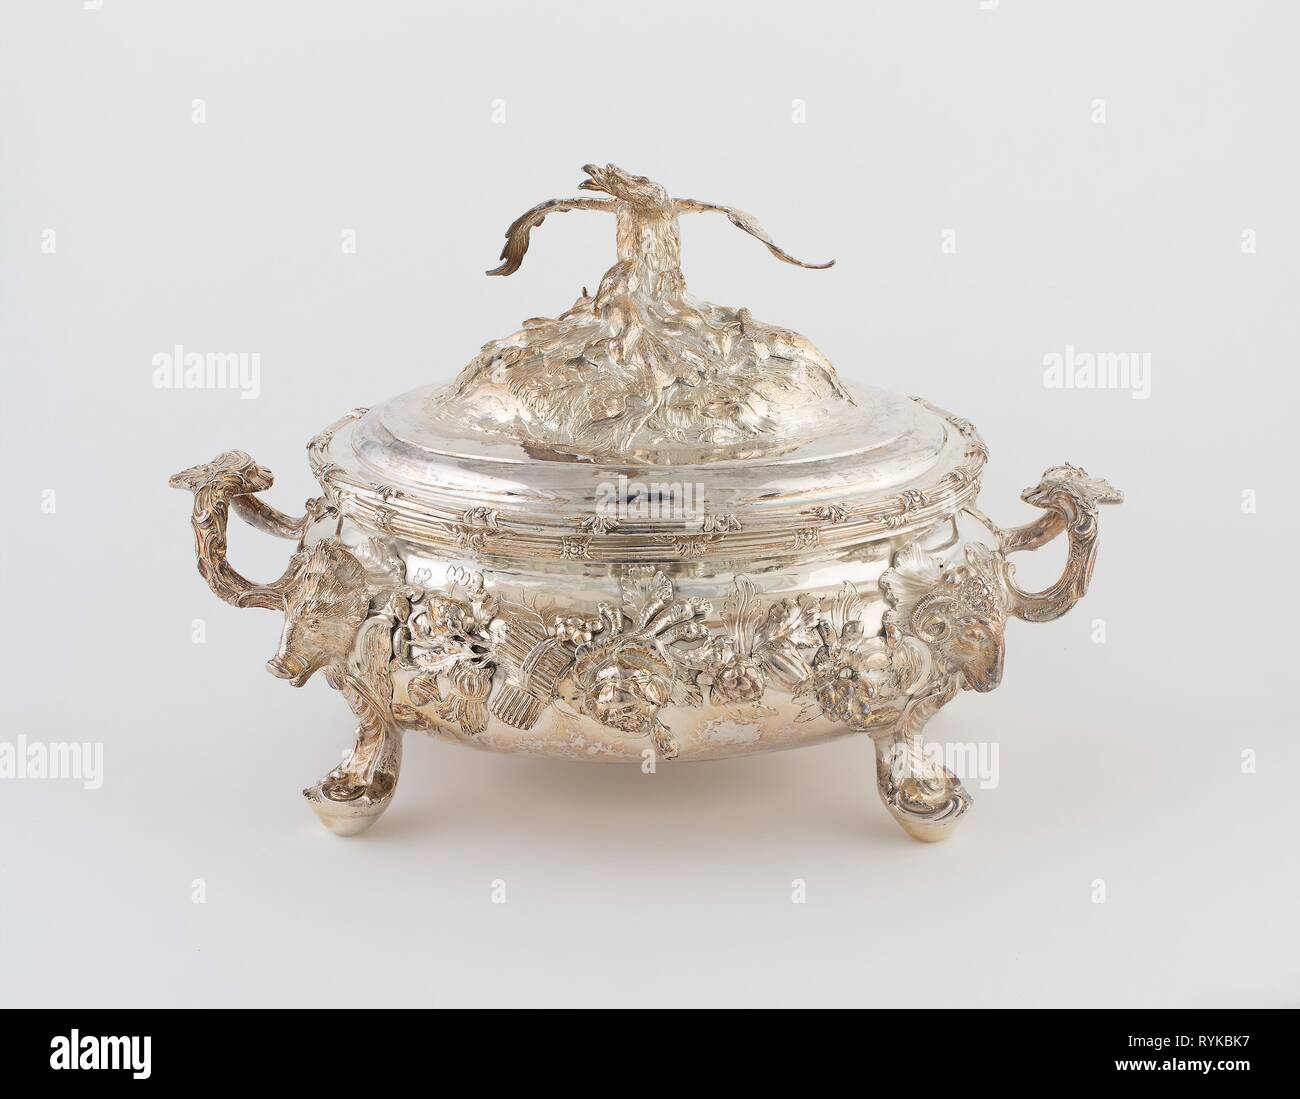 Tureen with Cover. Peter Archambo I; English, 1680-1768; London, England. Date: 1745-1746. Dimensions: H. 28.9 cm (11 3/8 in.). Silver. Origin: London. Museum: The Chicago Art Institute, Chicago, USA. Stock Photo